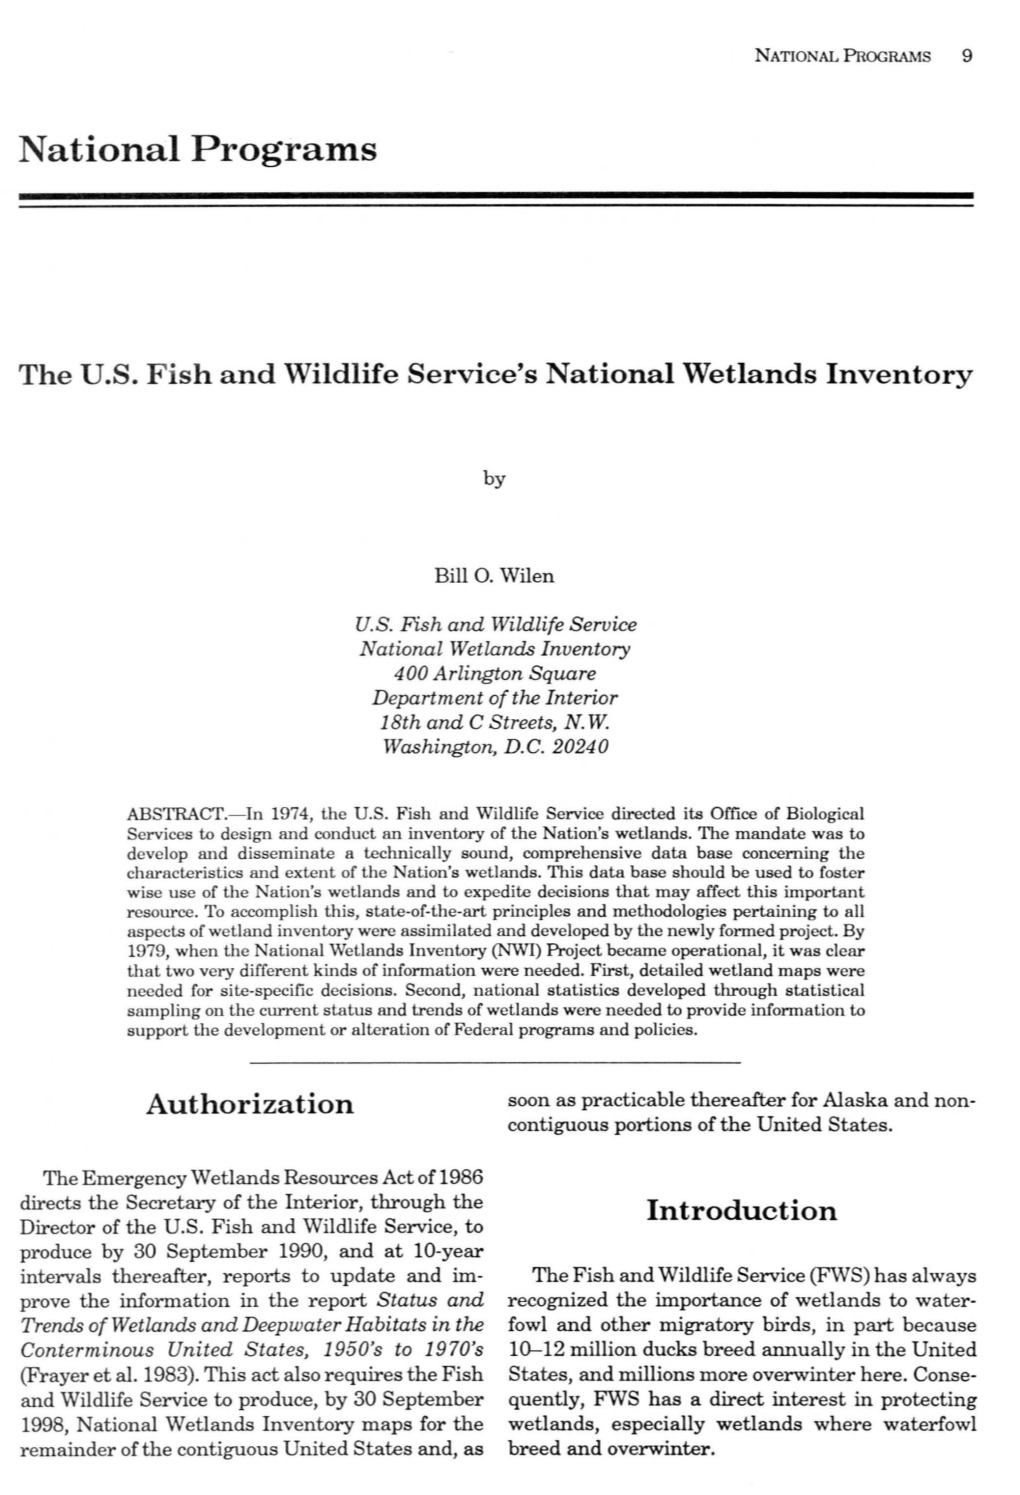 [Archive] the U.S. Fish and Wildlife Service's National Wetlands Inventory